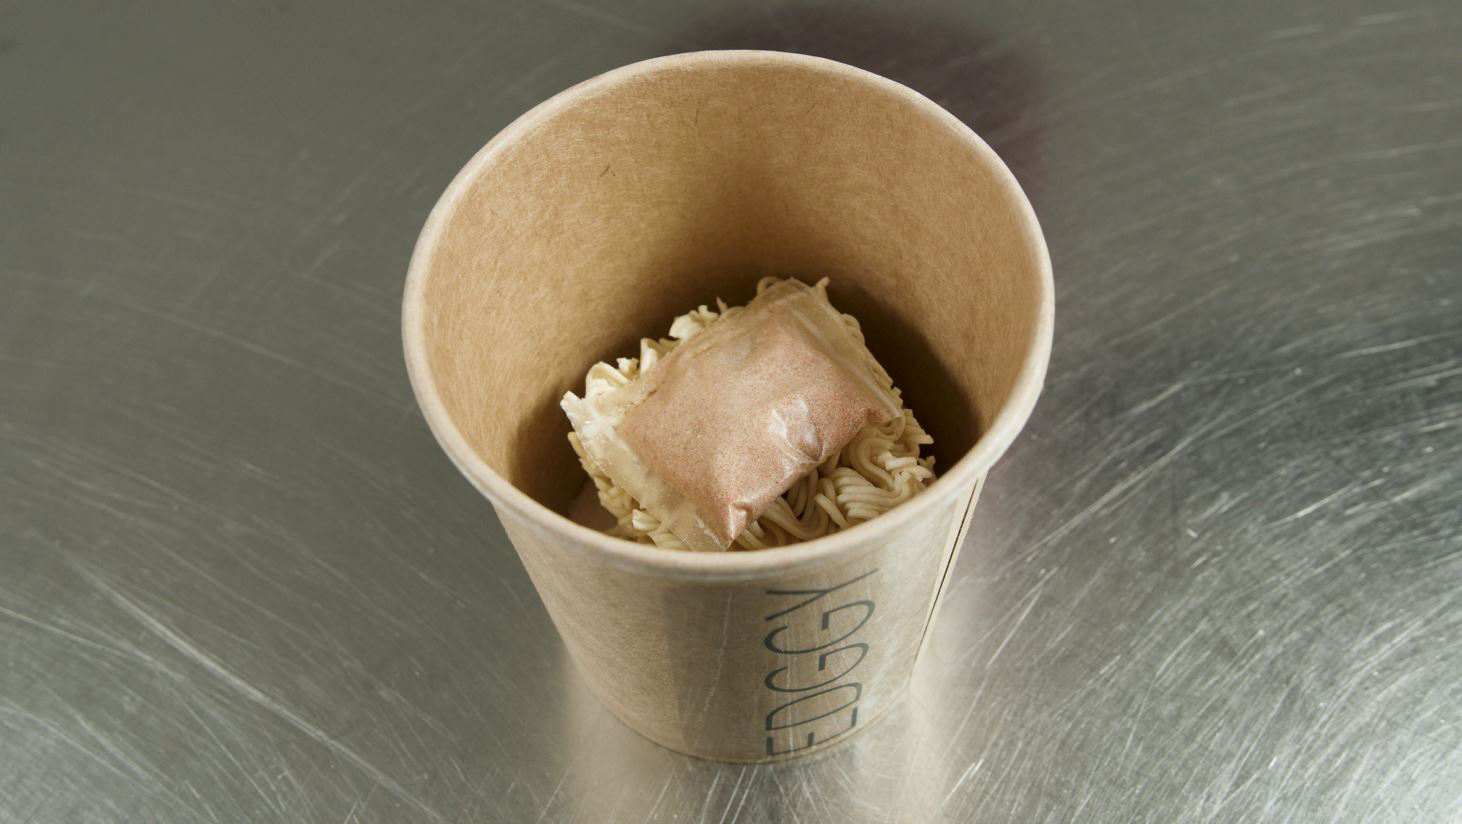 View of a paper cup with dried ramen noodles and a spice sachet on top.